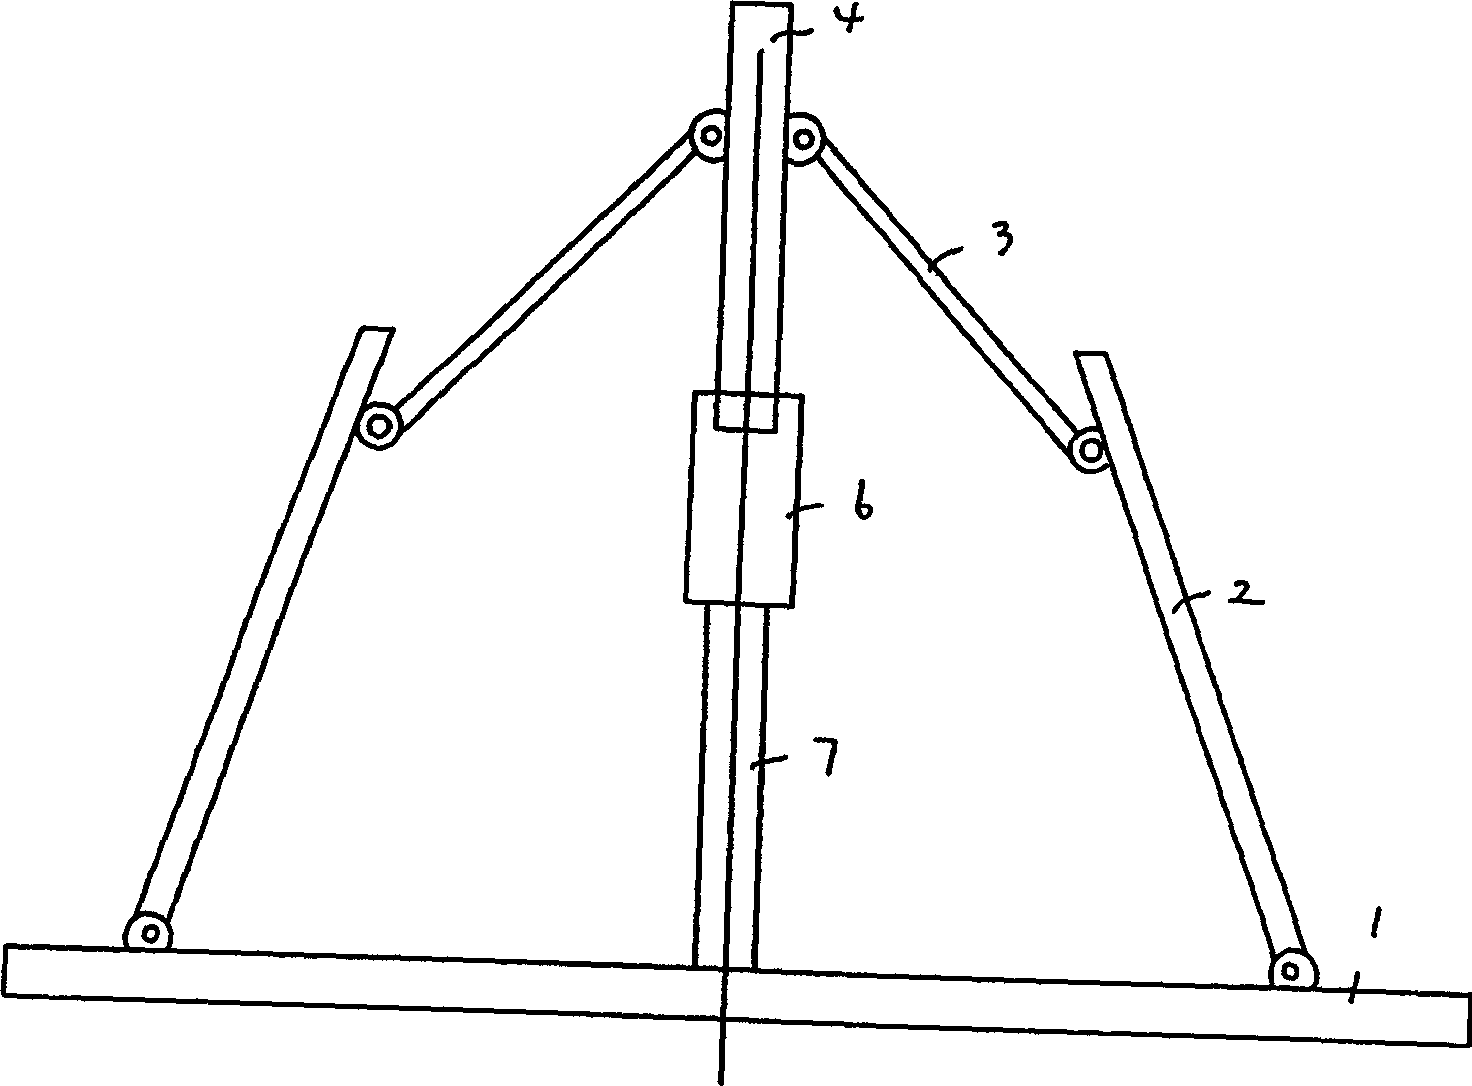 Core removal type rope releasing/retracting mechanism for bridge and structure